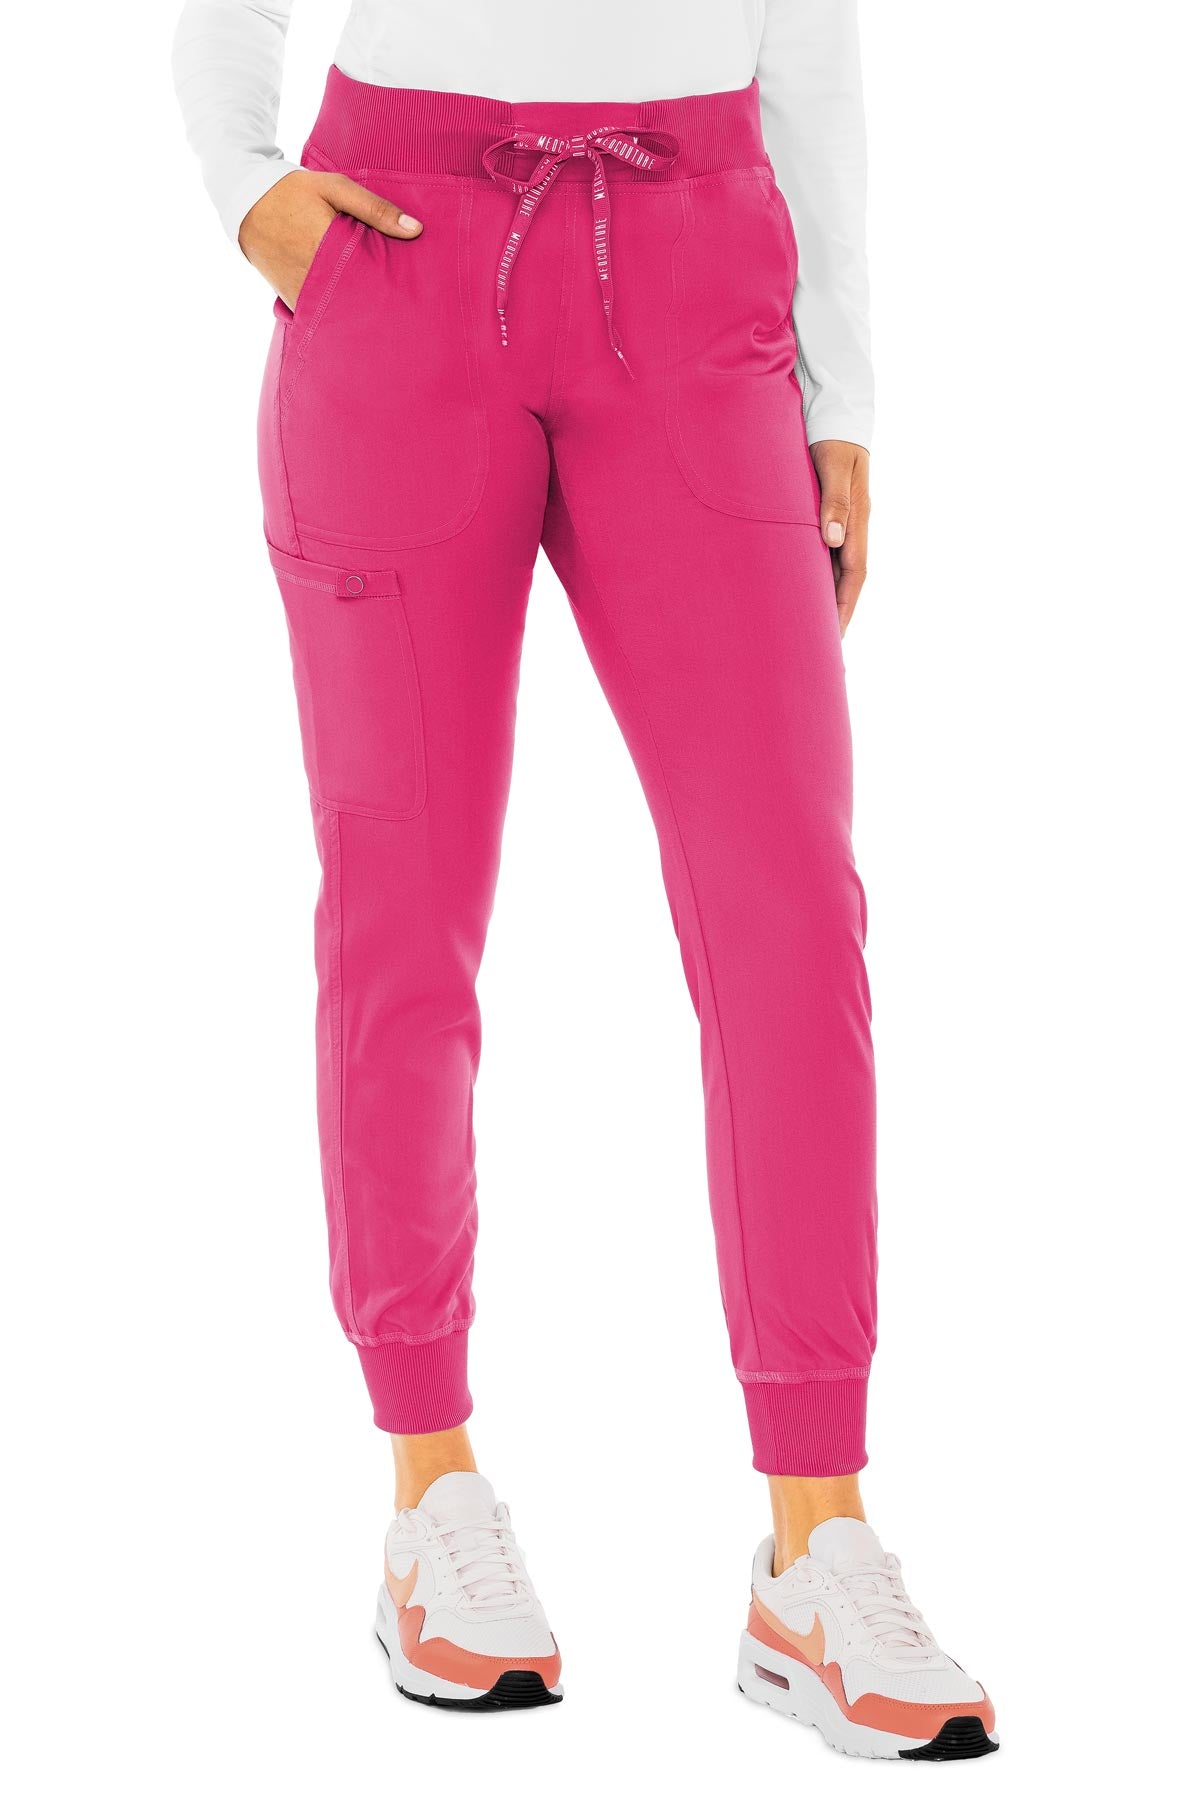 Med Couture Pink Punch PANT